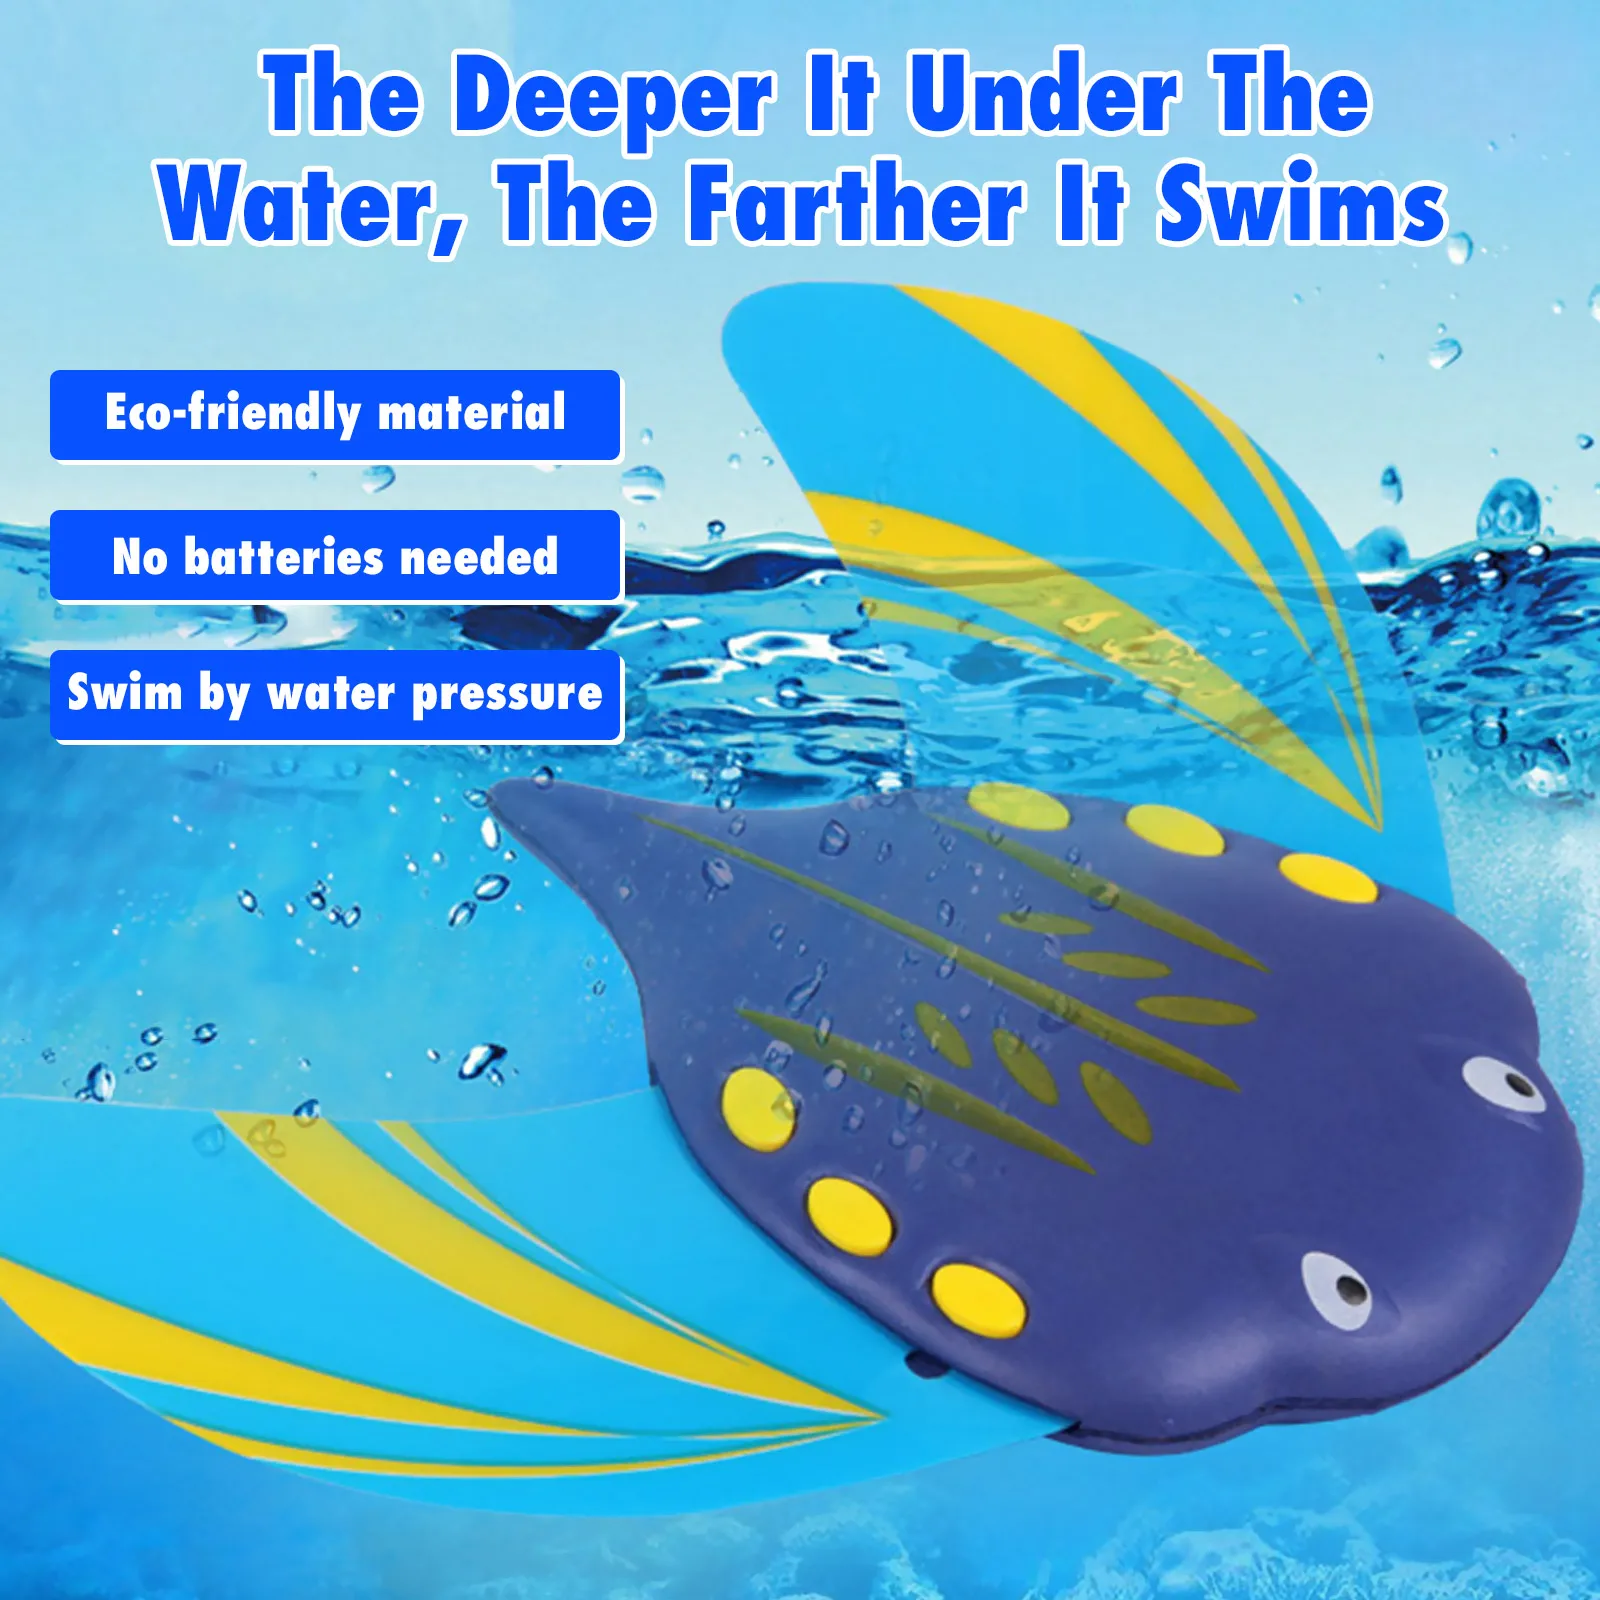 

Hydrodynamic Fish Toys Summer Pool Bathtub Beach Underwater Gliders with Adjustable Fins Swimming Fish Toys for Kids Children